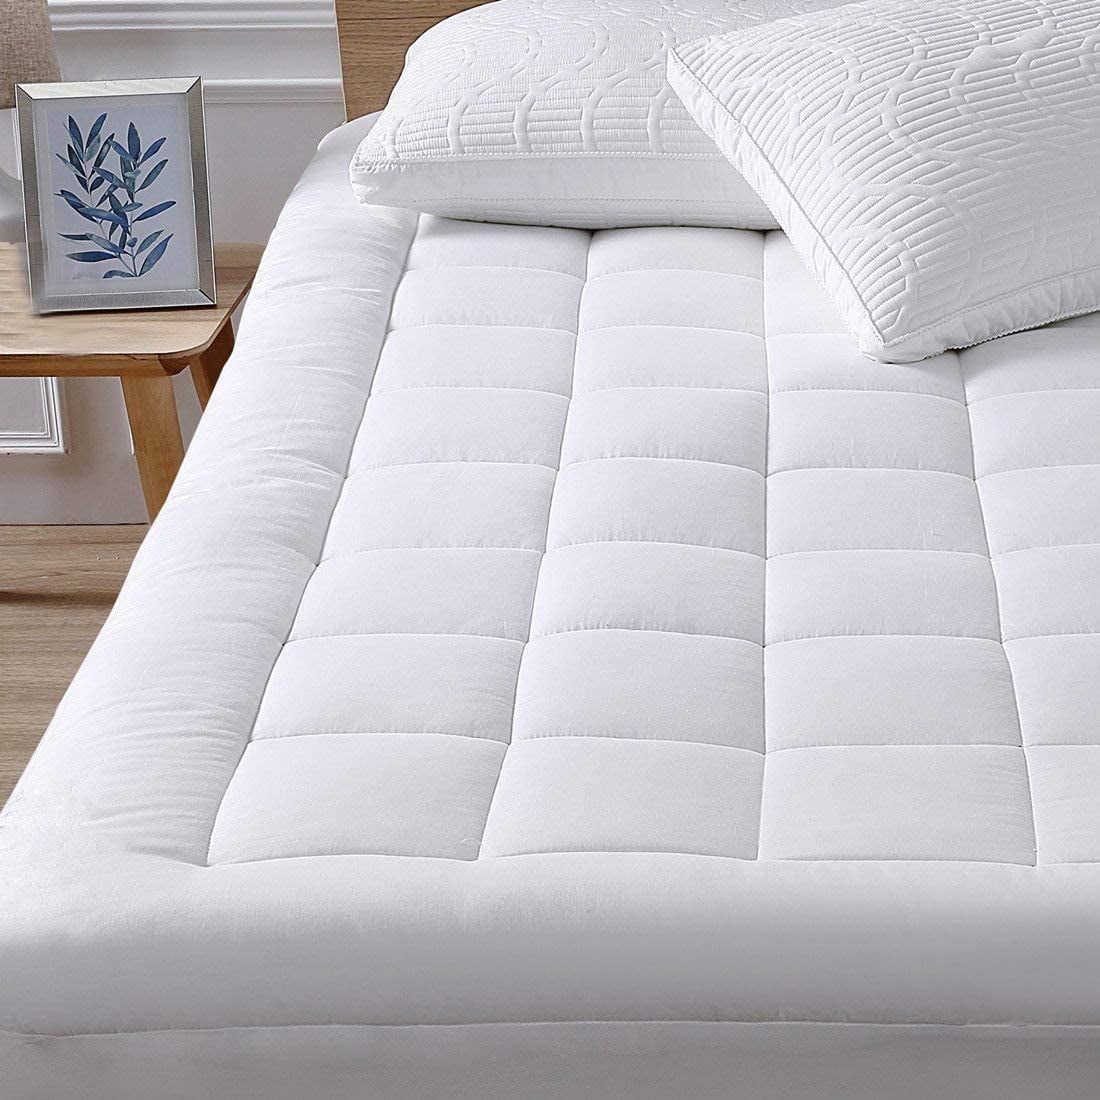 King Size Mattress Pad Cover Pillow Top Topper Thick Cotton Luxury Bed Bedding 